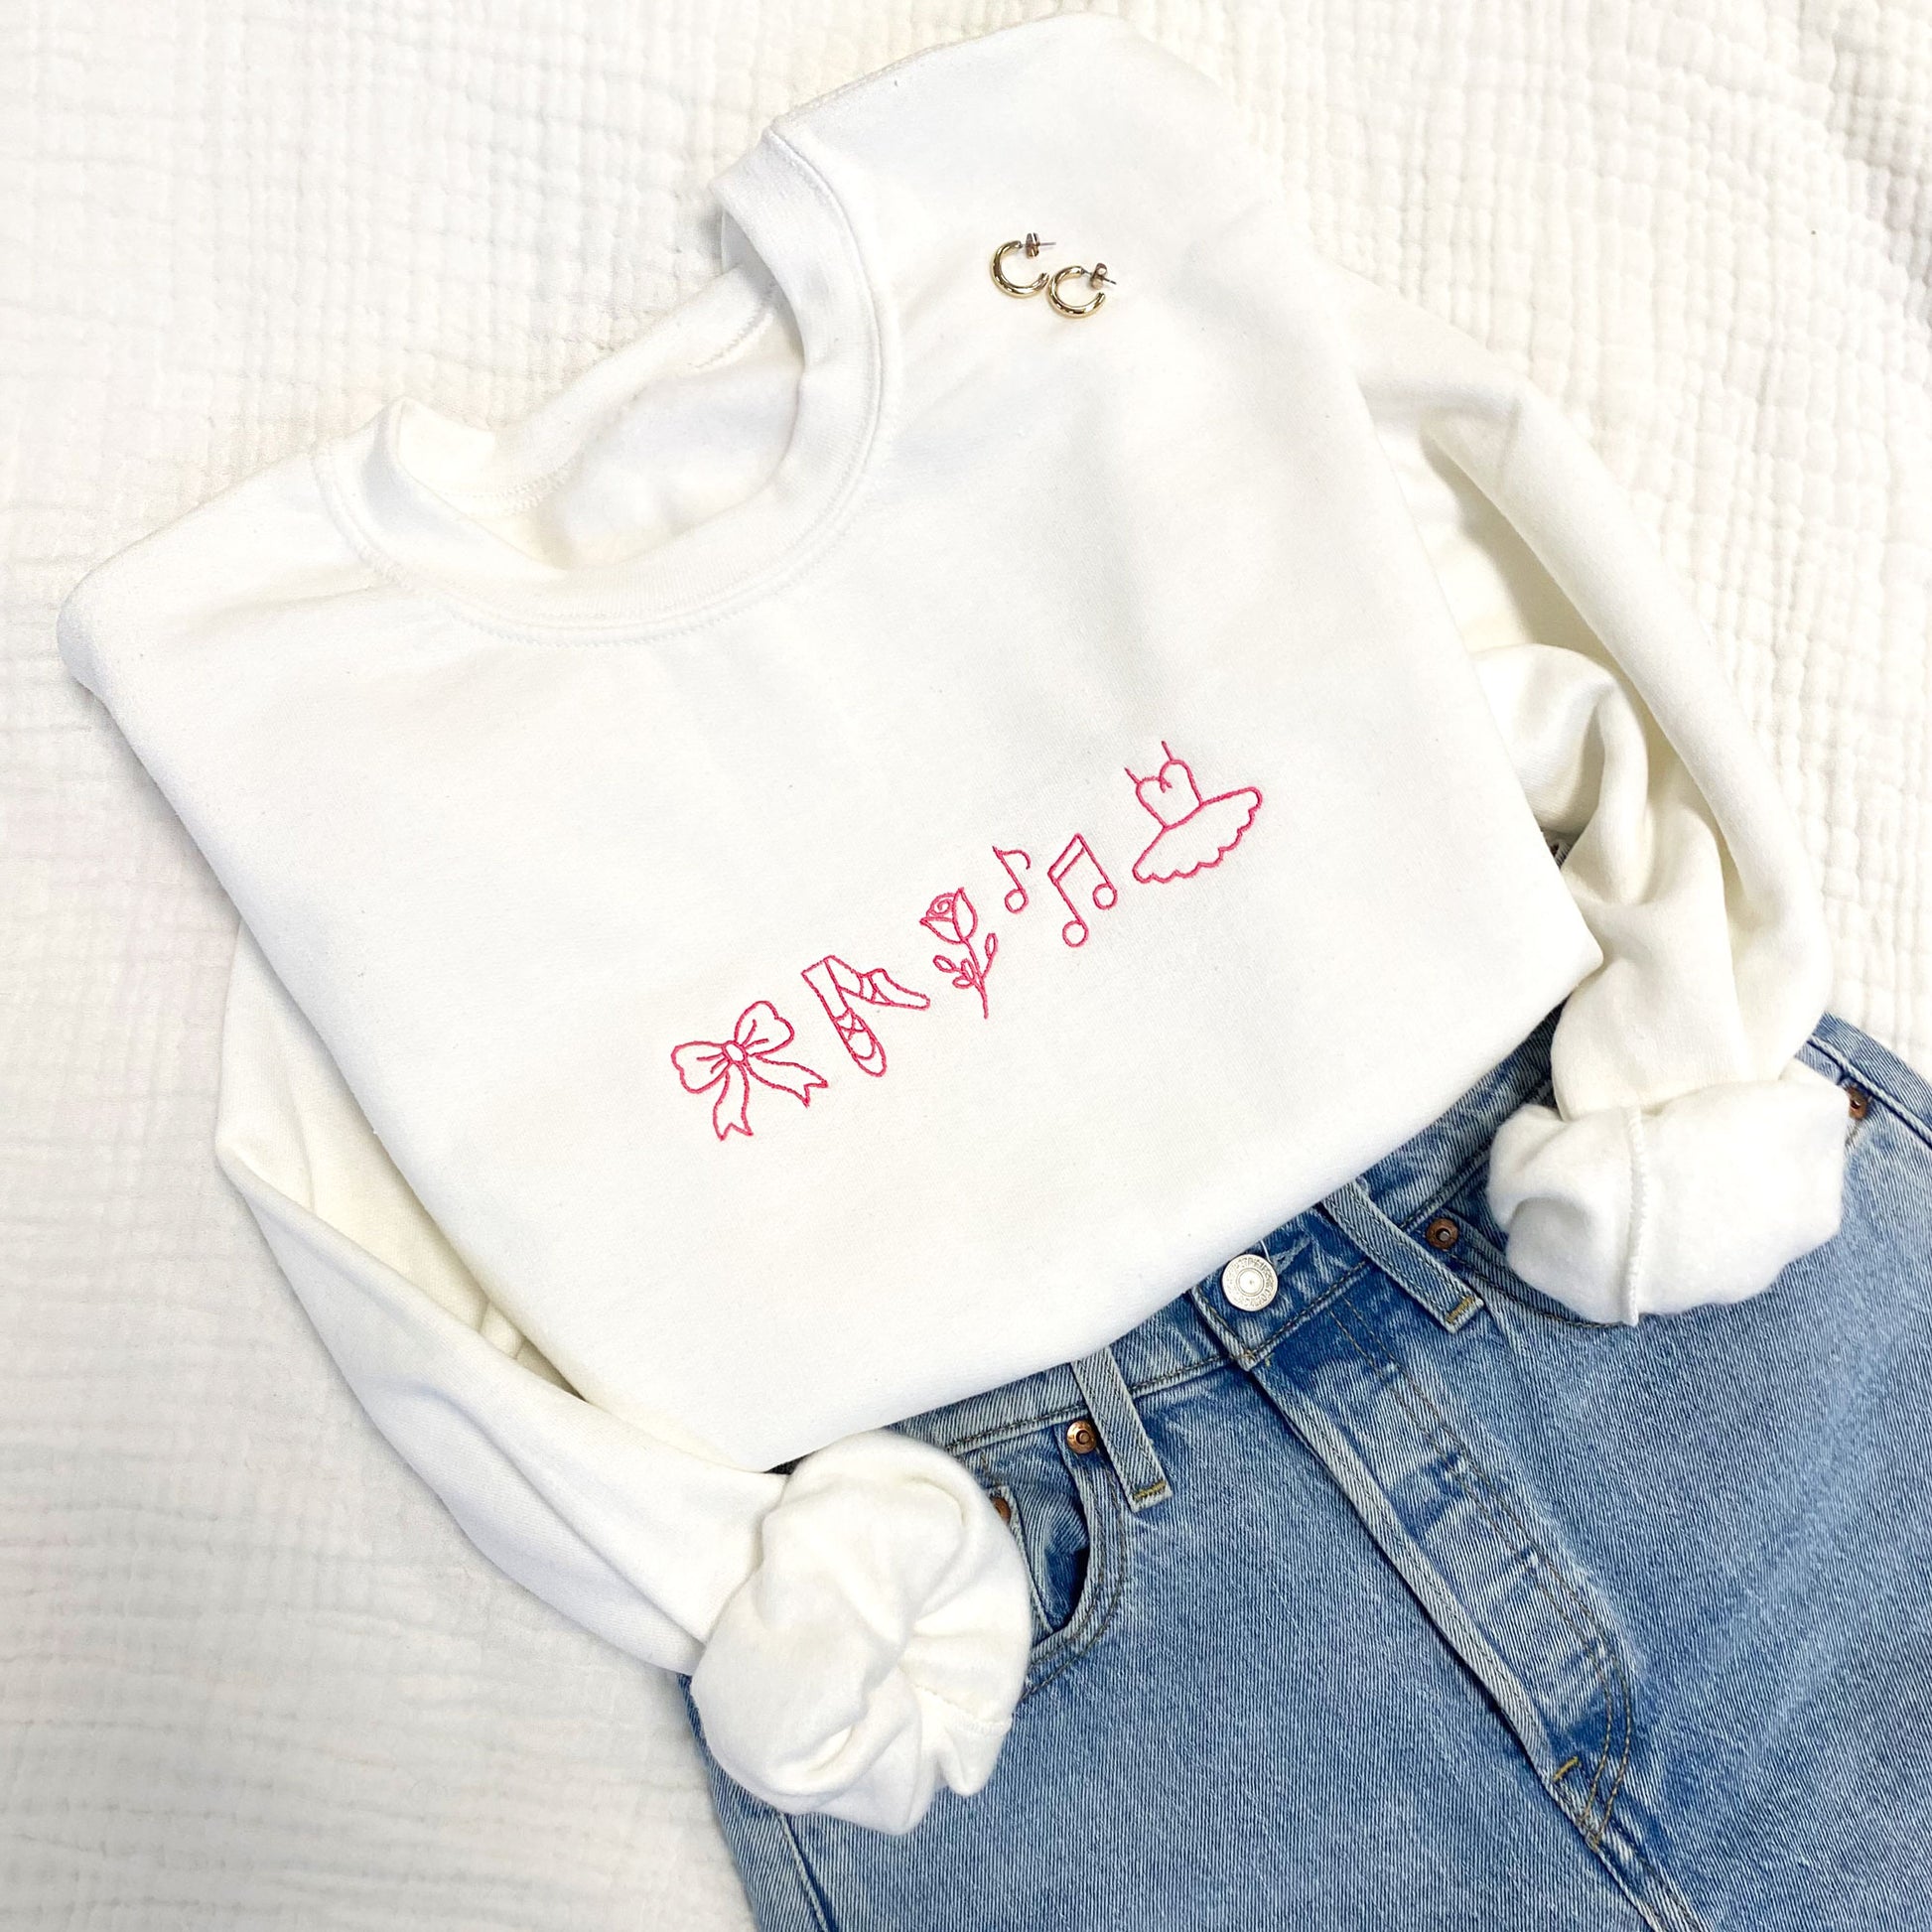 Styled flay lay of an embroidered dance icon crewneck sweatshirt with pink thread.